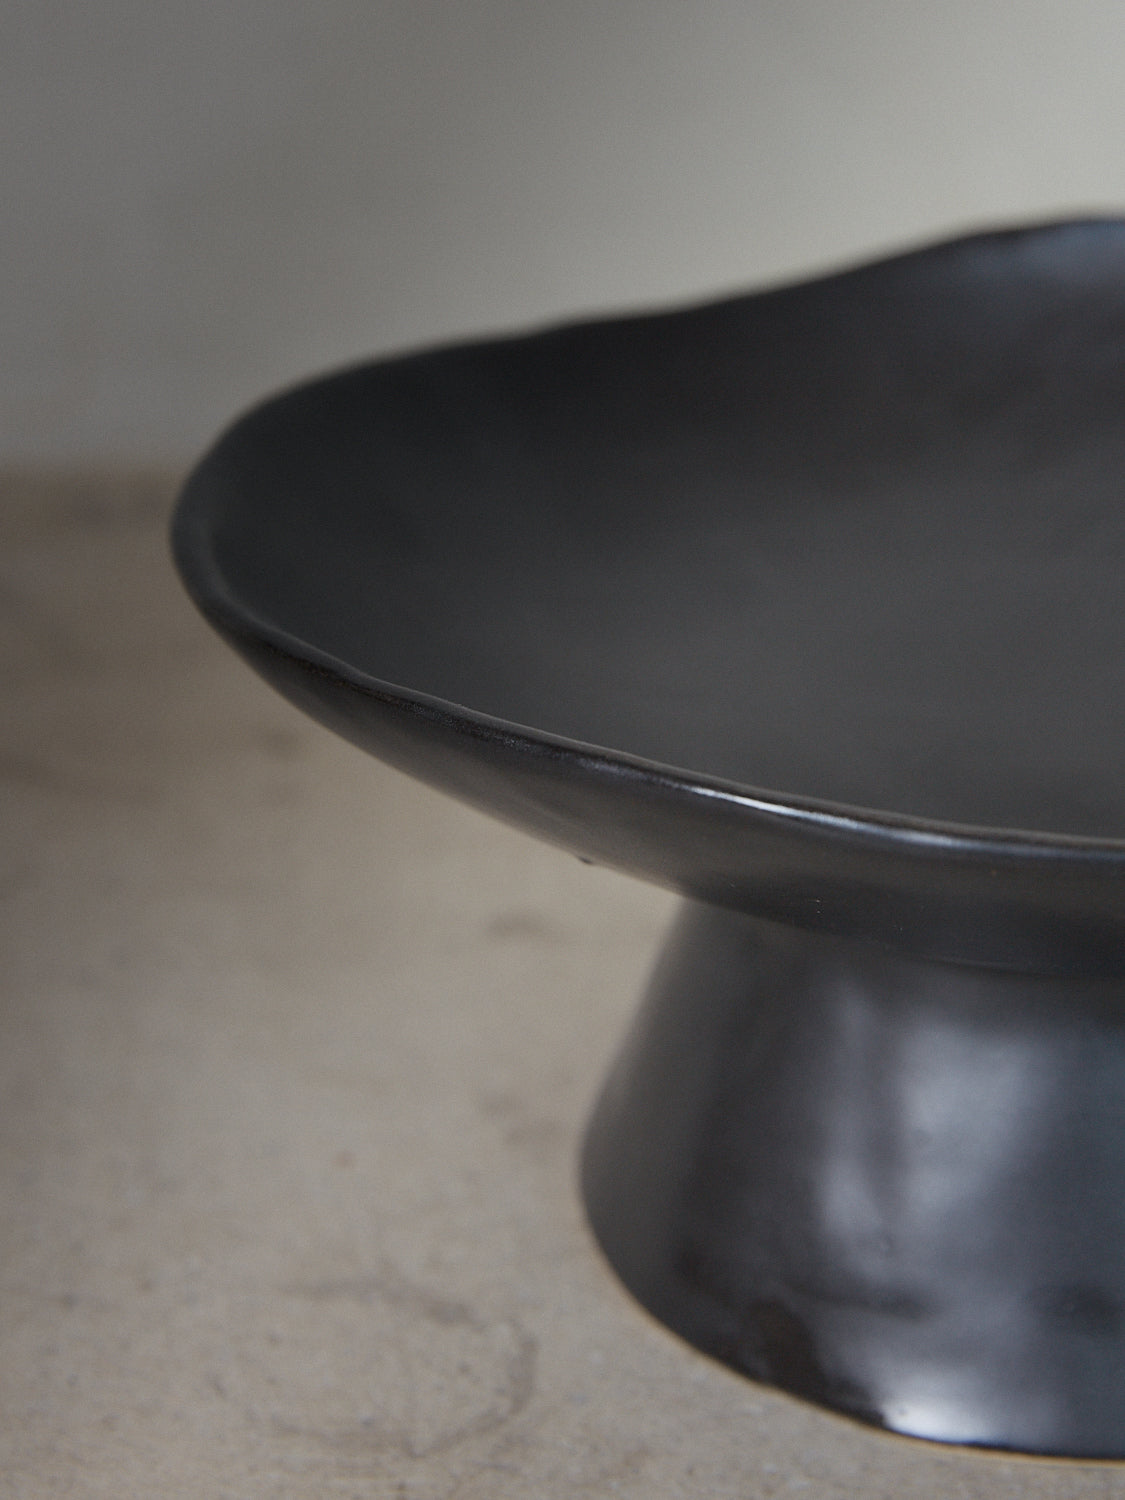 Black Raw Pedestal. Exclusively ours. Handmade ceramic compote bowl with tapered pedestal foot base in a matte black finish